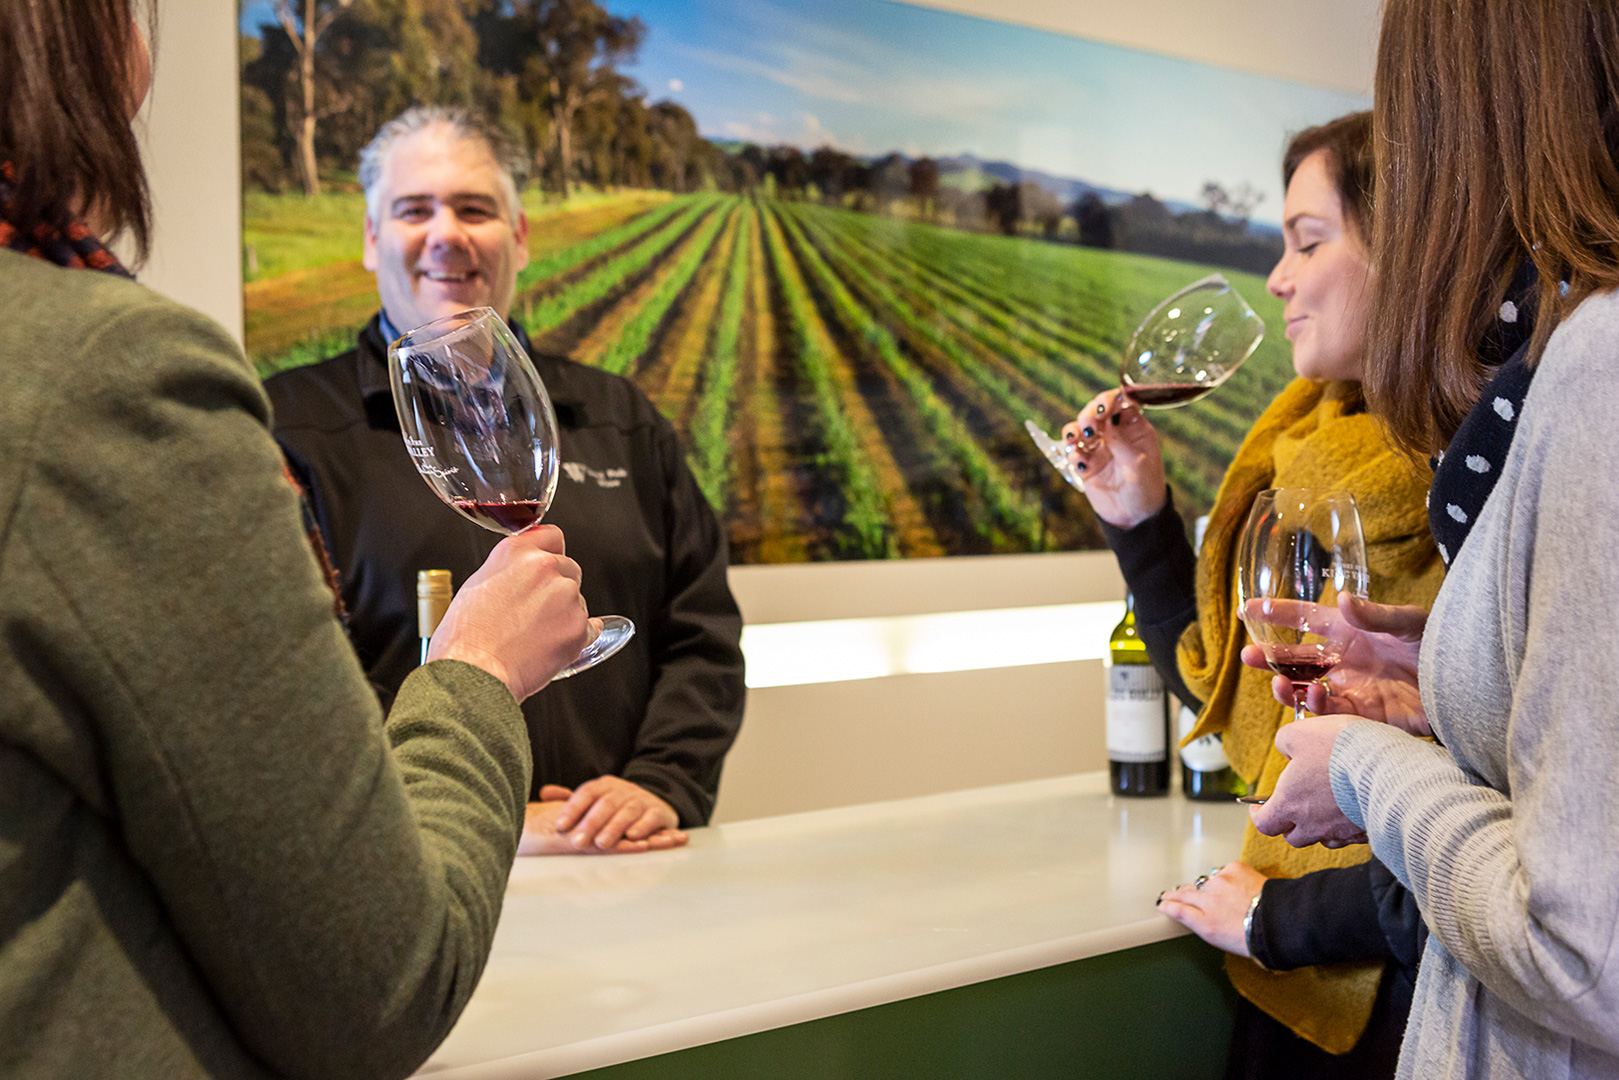 King Valley’s Food & Wine Festival